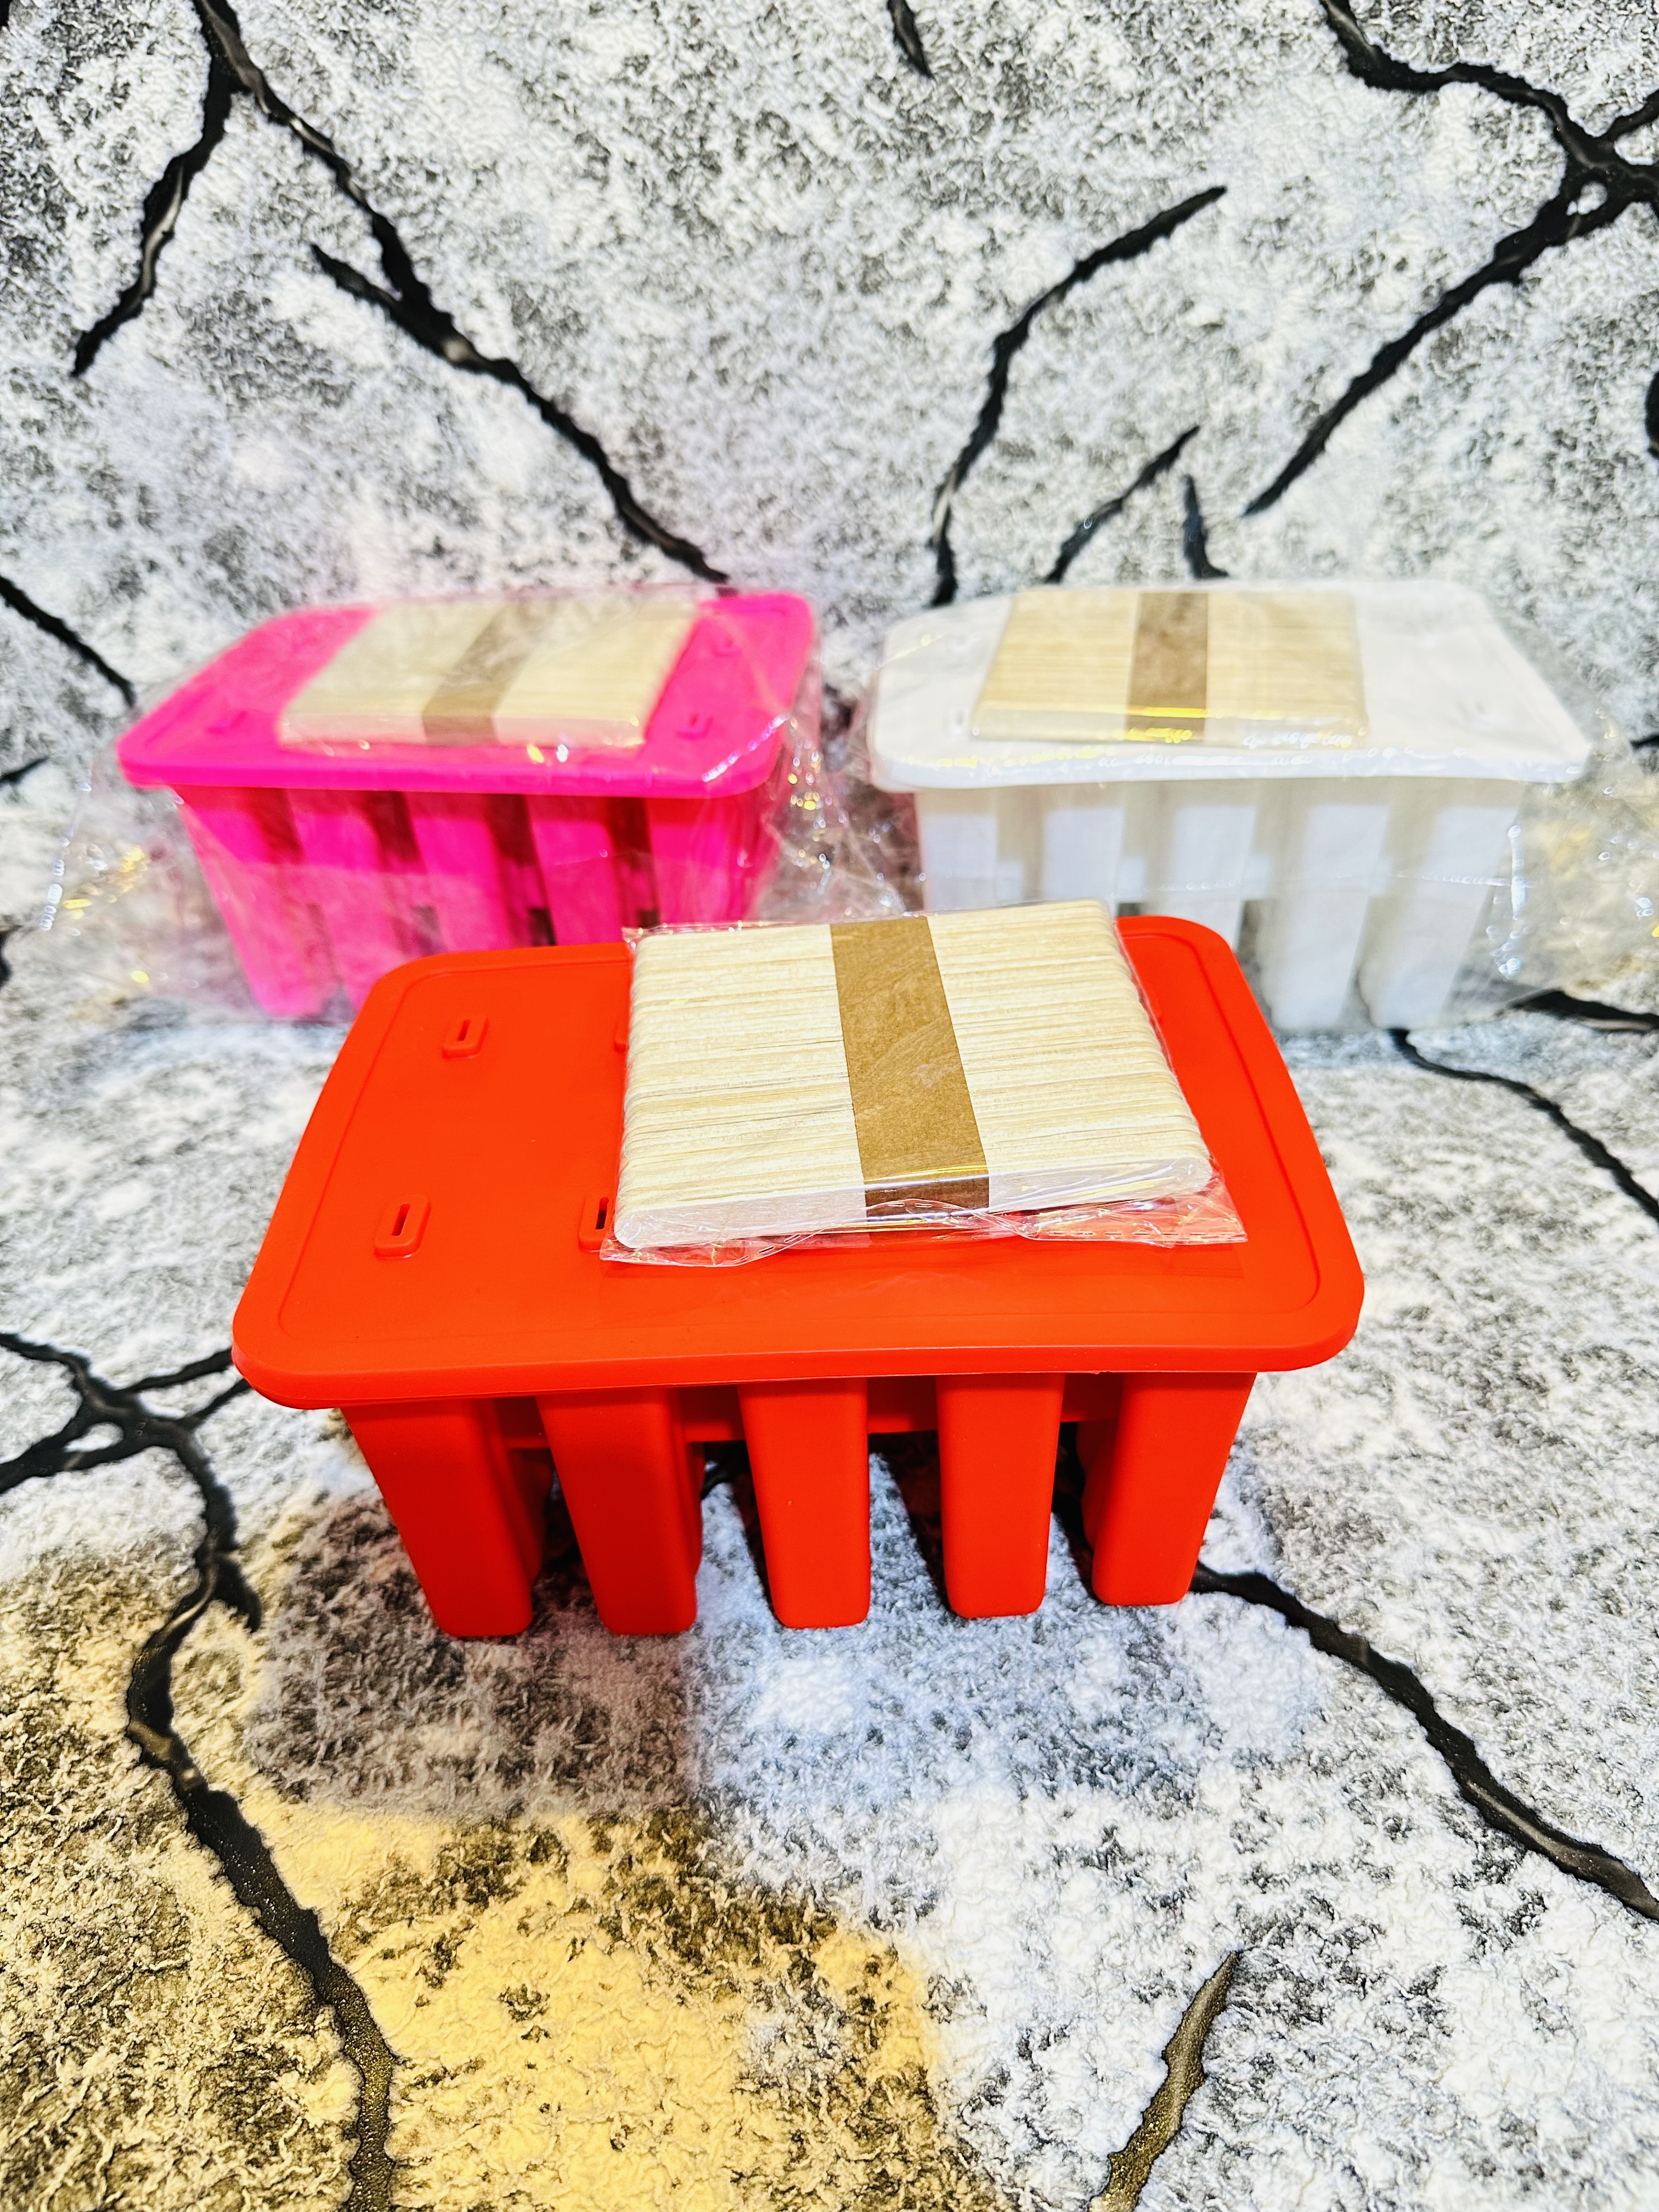 Silicon 10 in 1 Popsicle maker 